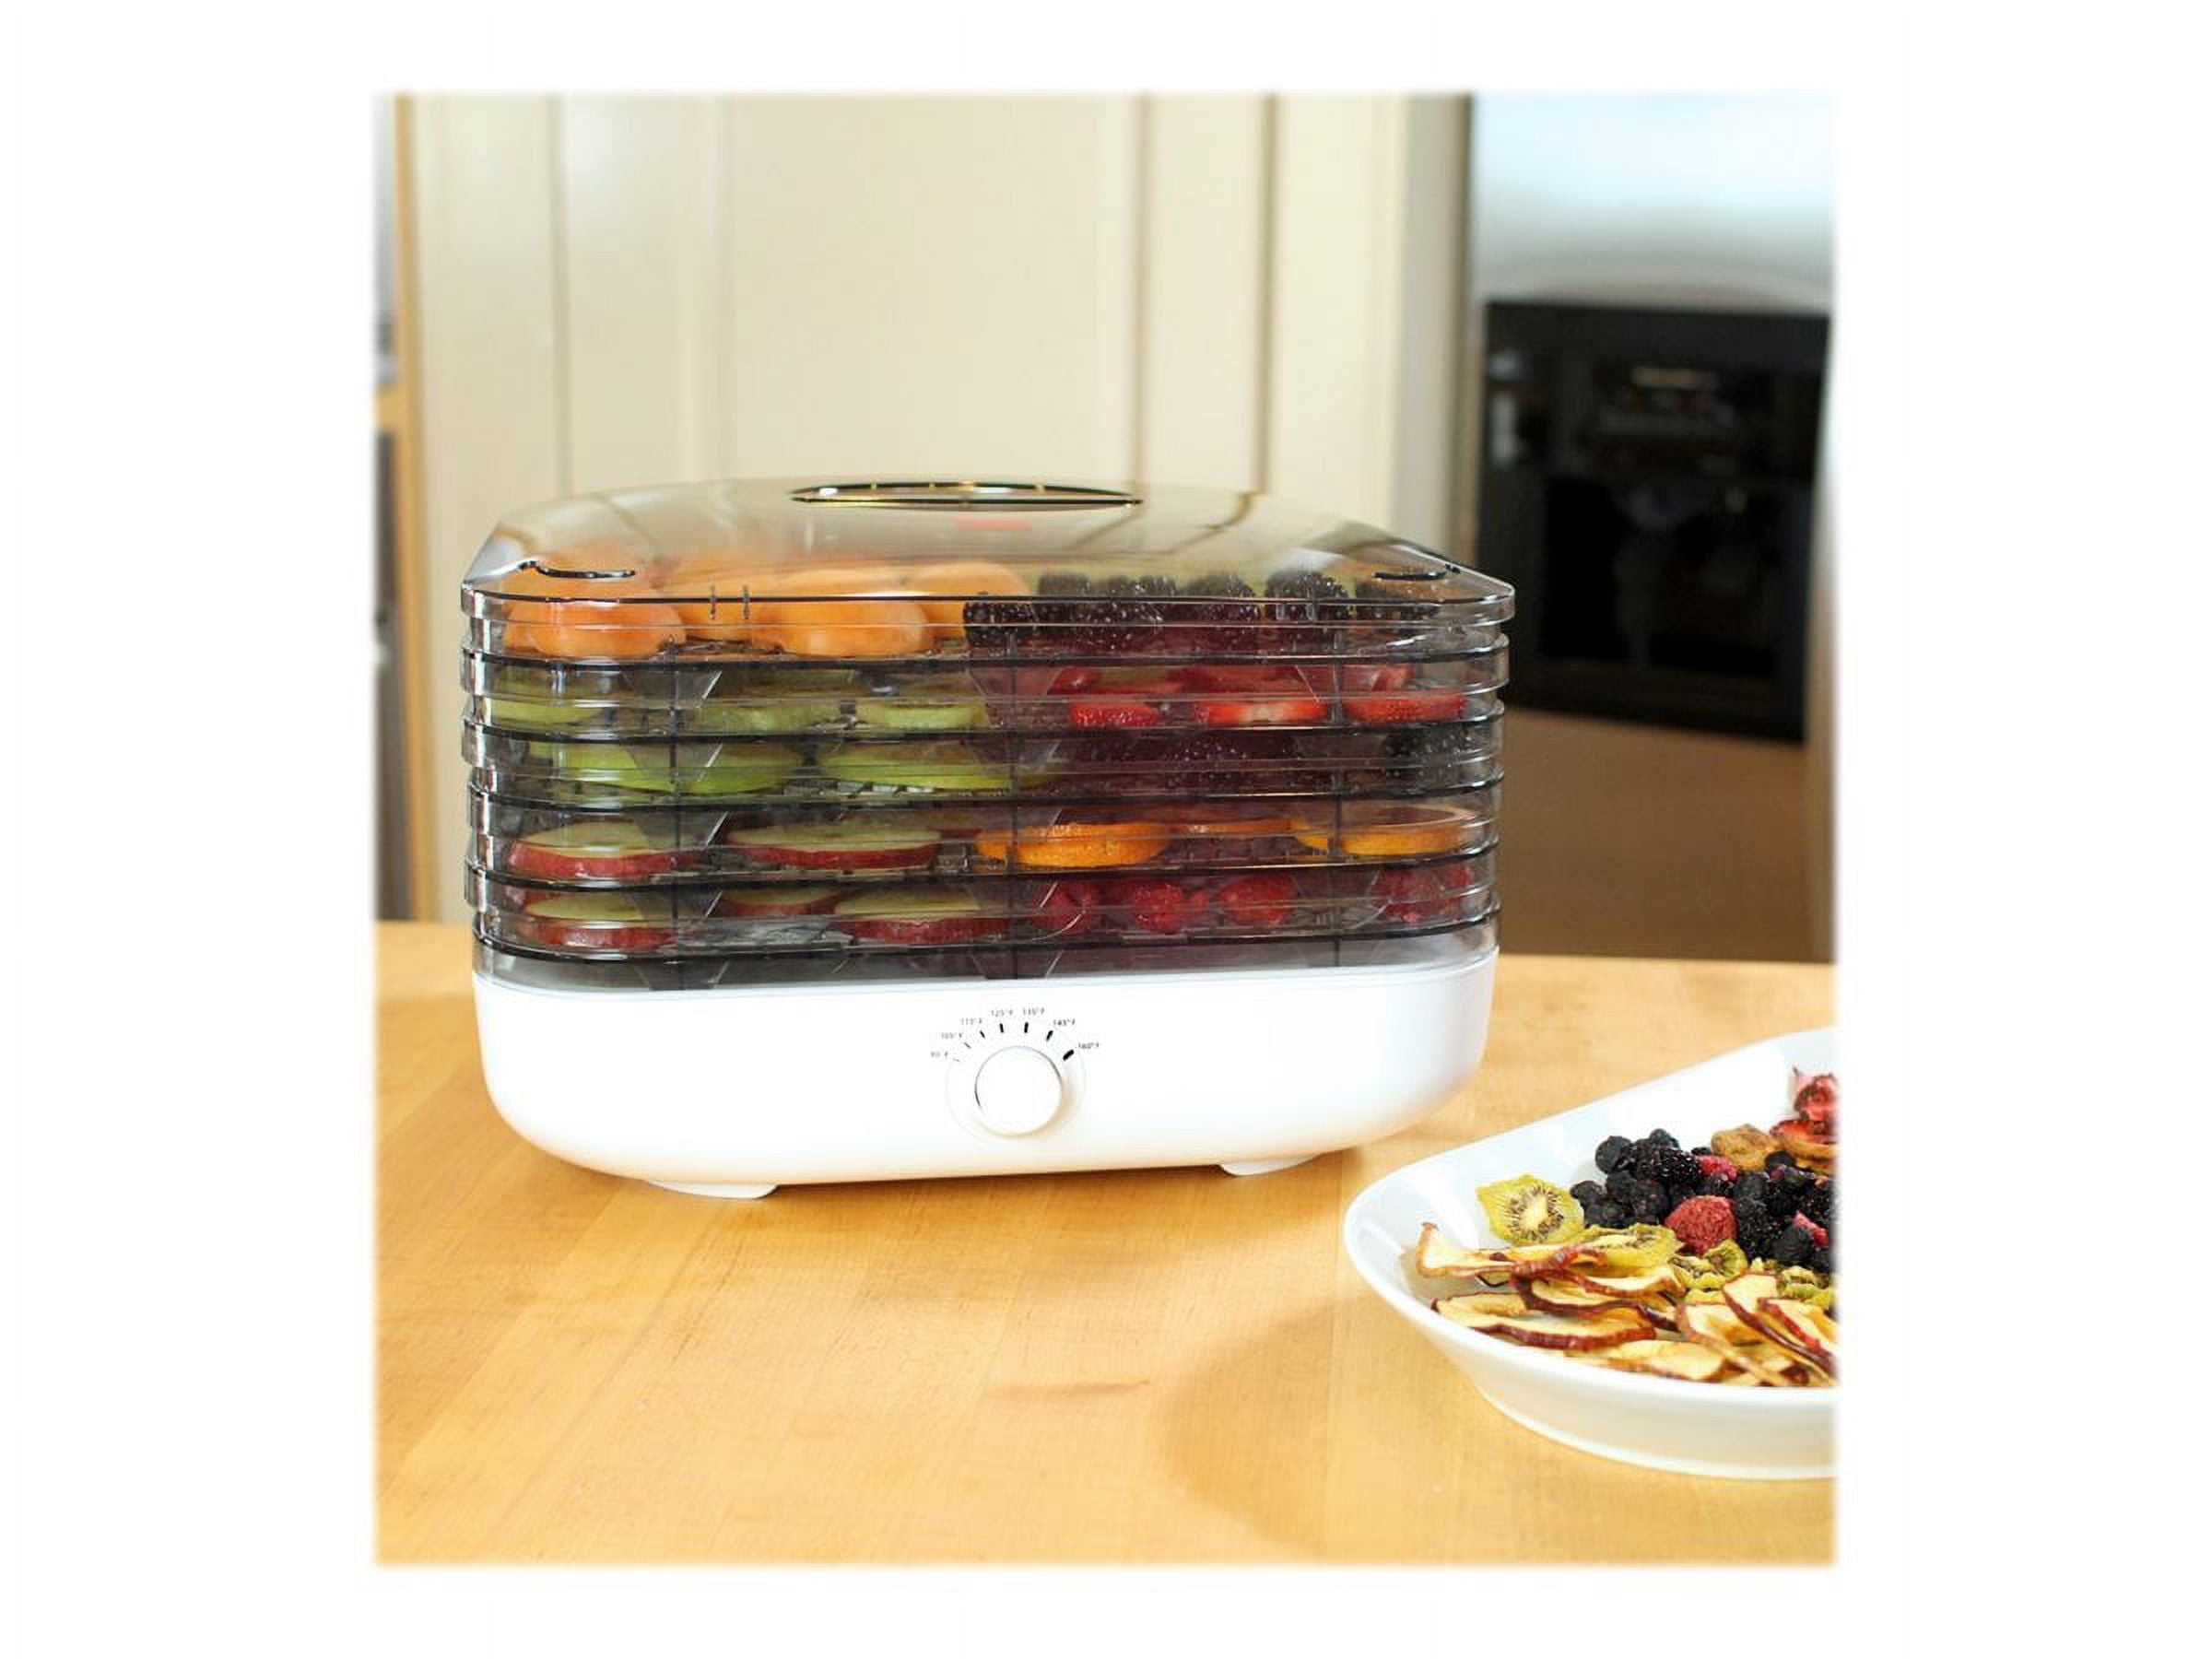 Ronco Turbo EZ-Store 5-Tray Dehydrator with Convection Air Flow, Food  Preserver Adjustable Temperature Control, Quiet Operation, for Jerky,  Fruits, Vegetables, Herbs, White 